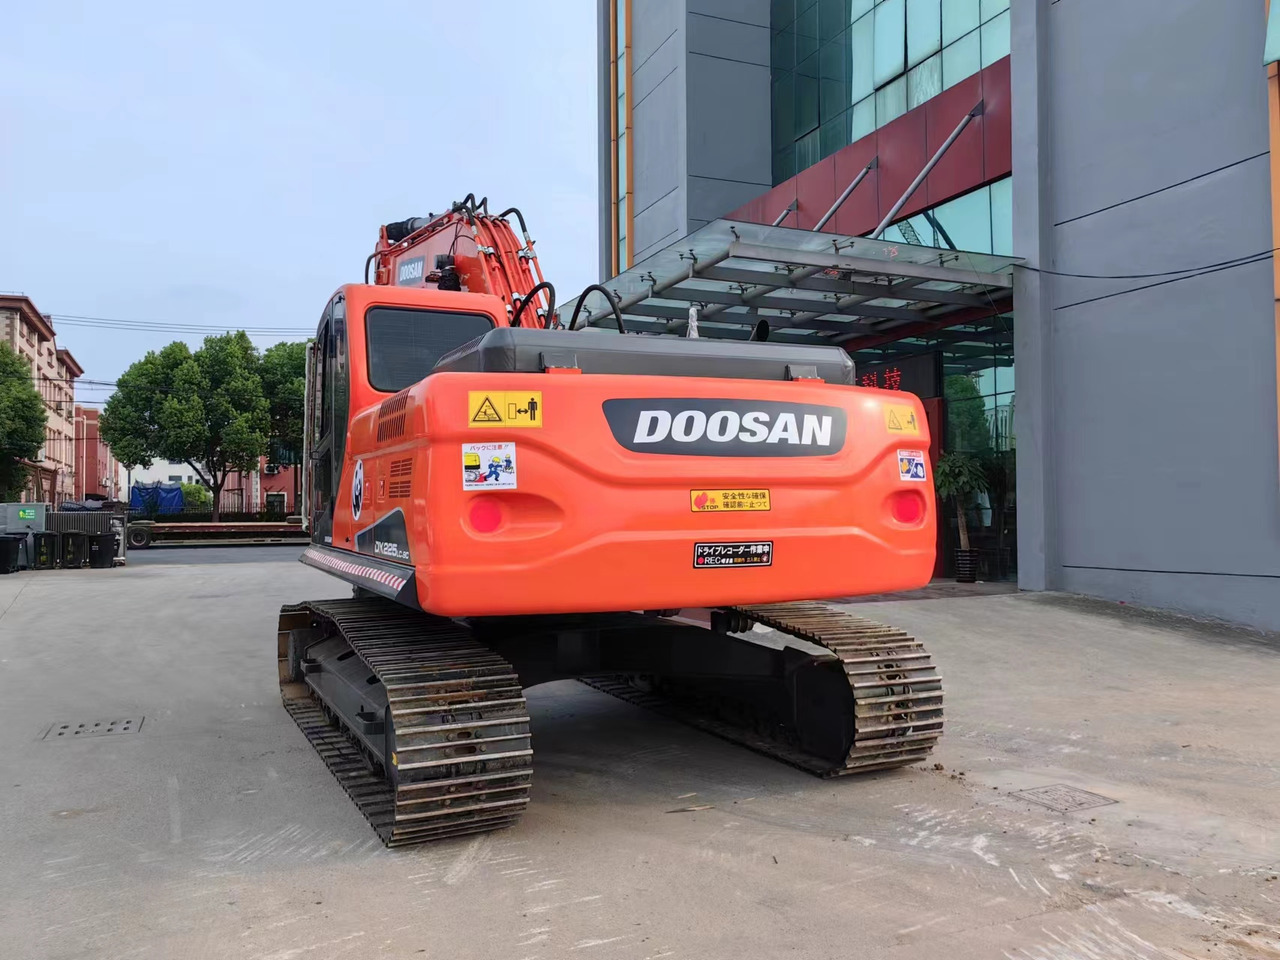 Rupsgraafmachine DOOSAN used excavator DX225LC-9 more videos and pictures of details and cab welcome to inquire: afbeelding 4